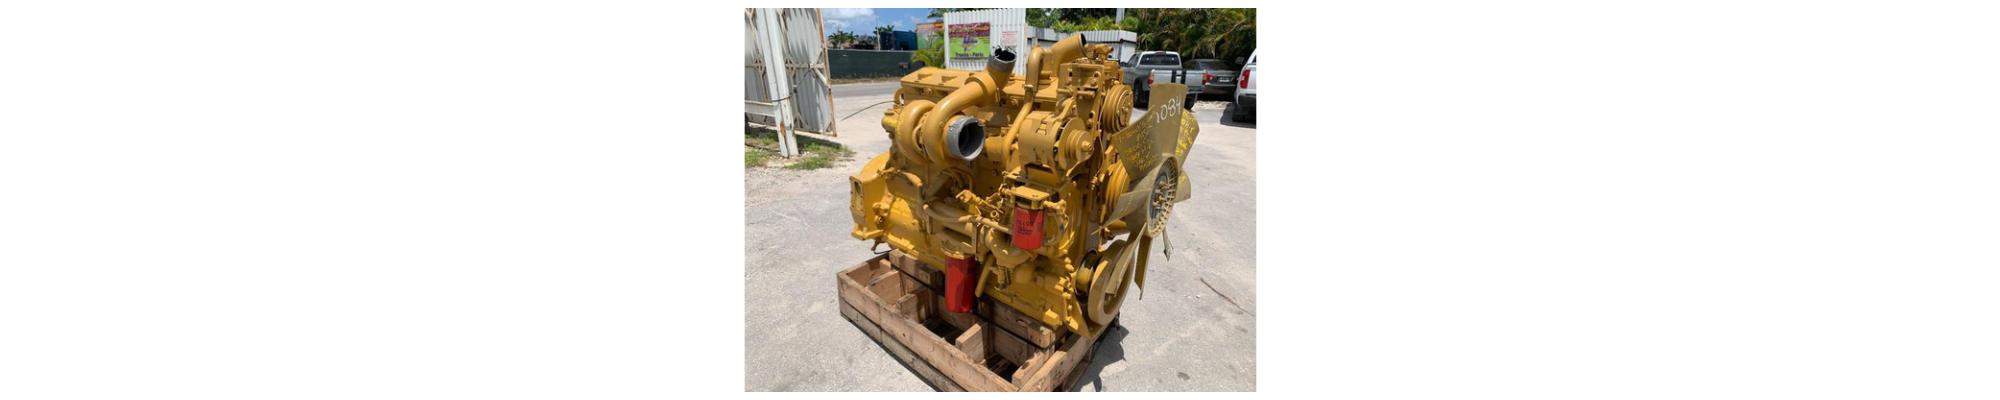 CAT 3406C Engine Assembly in MIAMI, FL #190-0717193